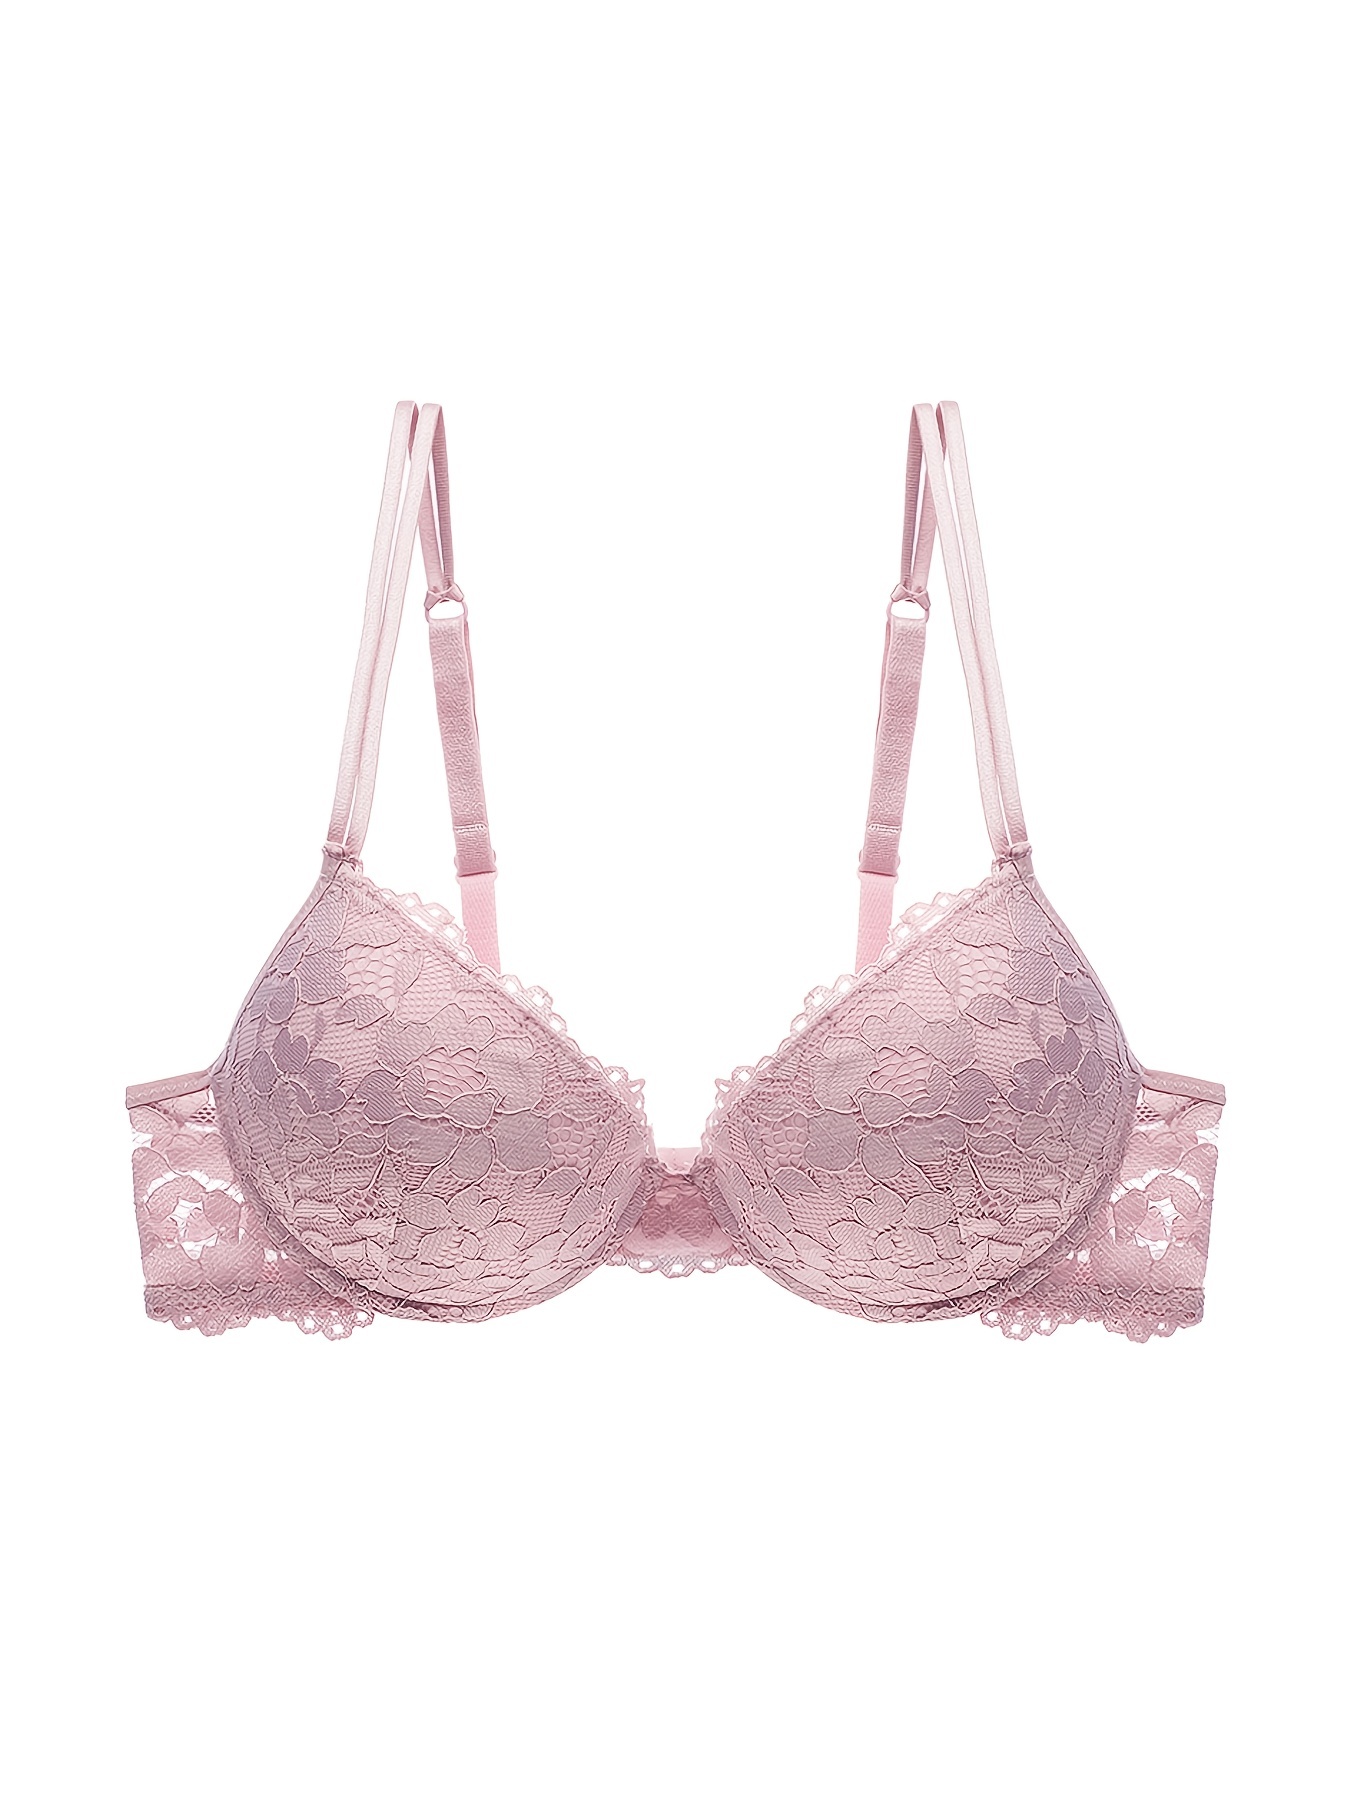 Push-up bra (D cup) Woman, Pink